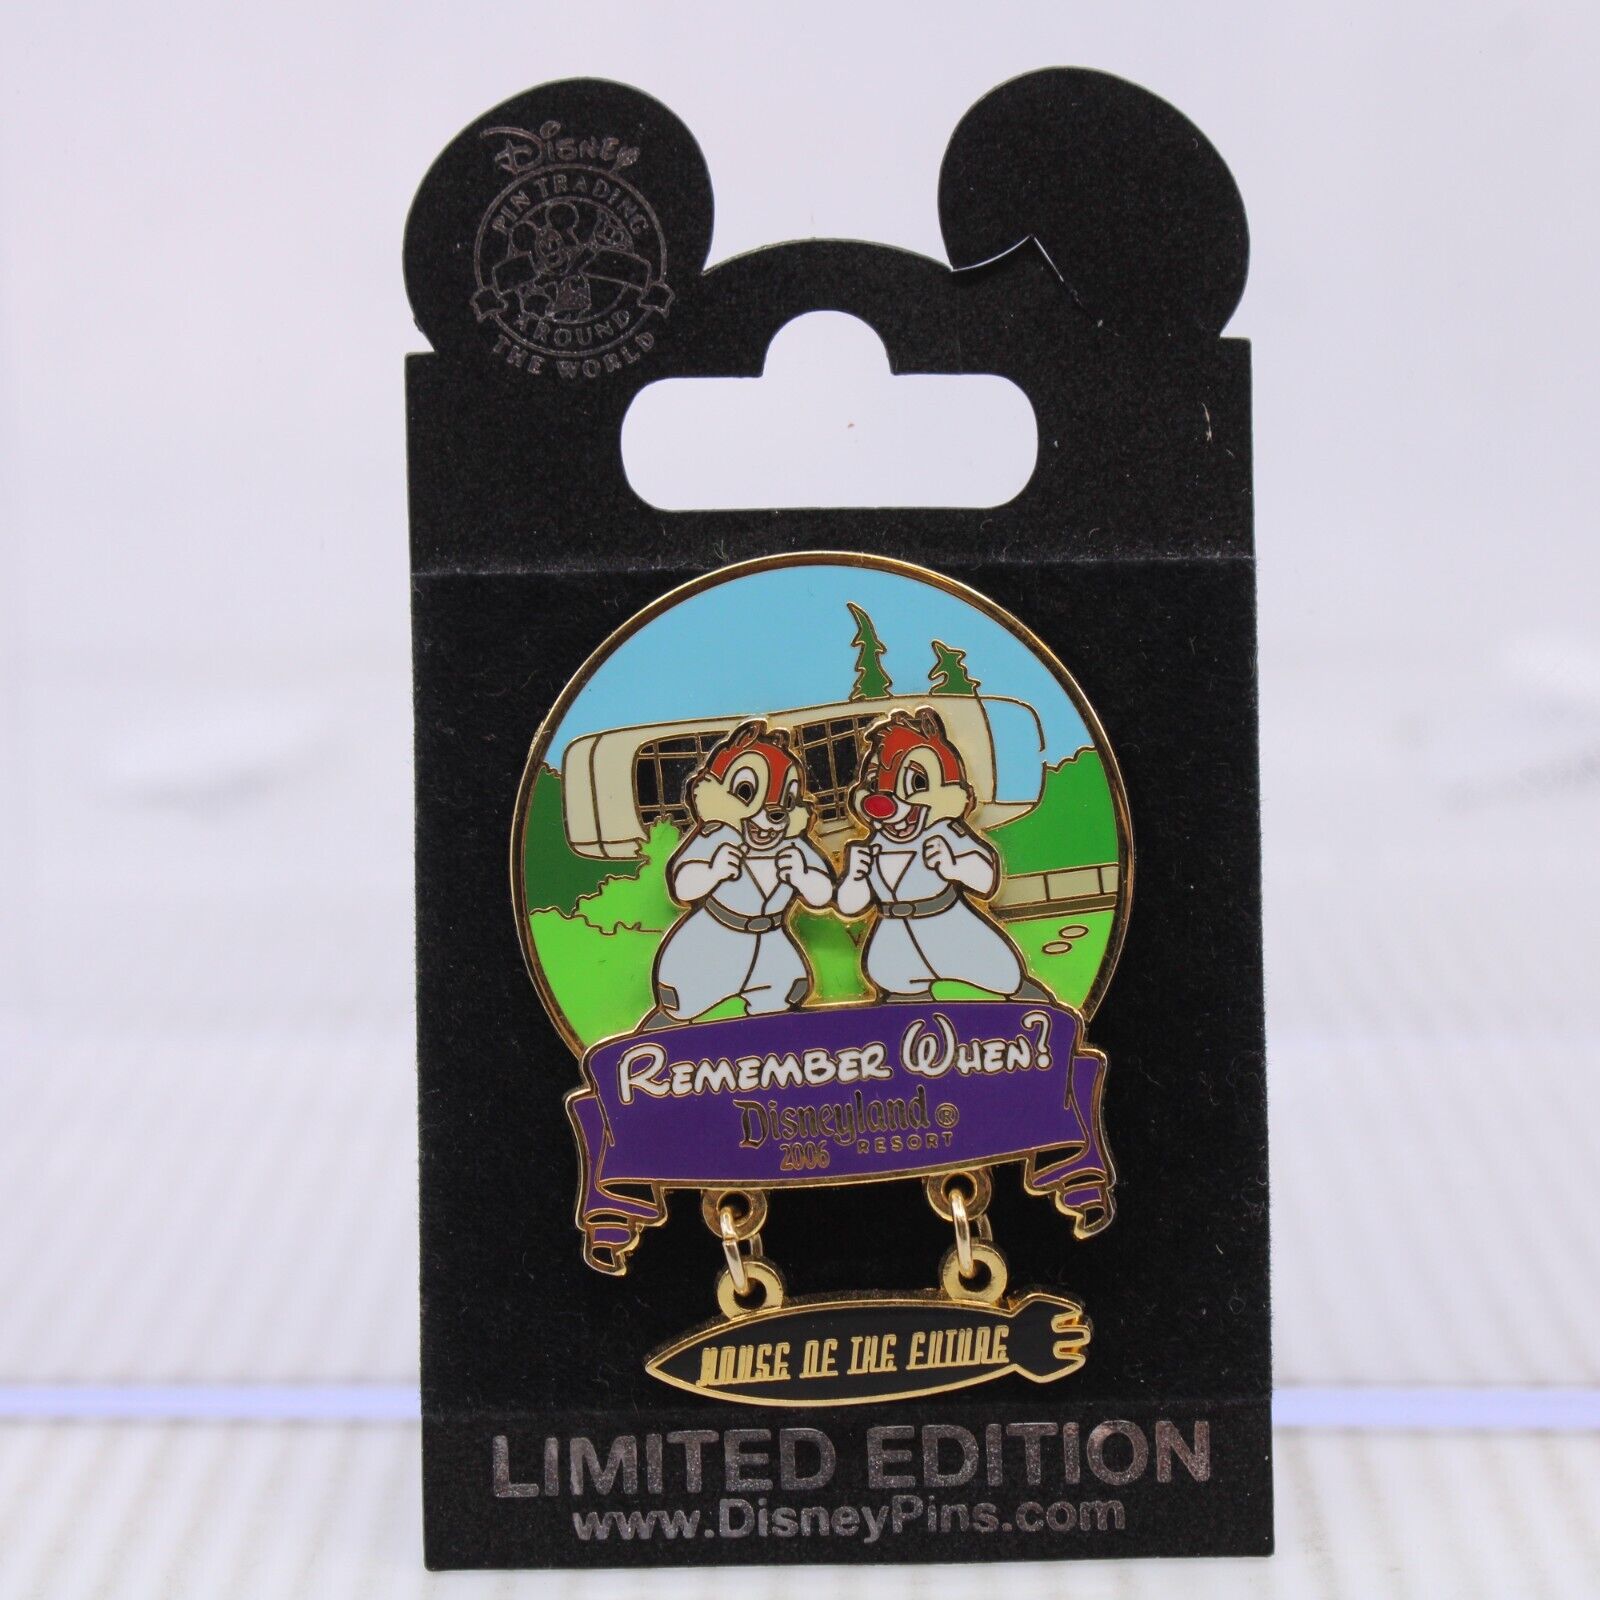 C2 Disney DLR LE 750 Pin Remember When House of the Future Chip Dale Dangle